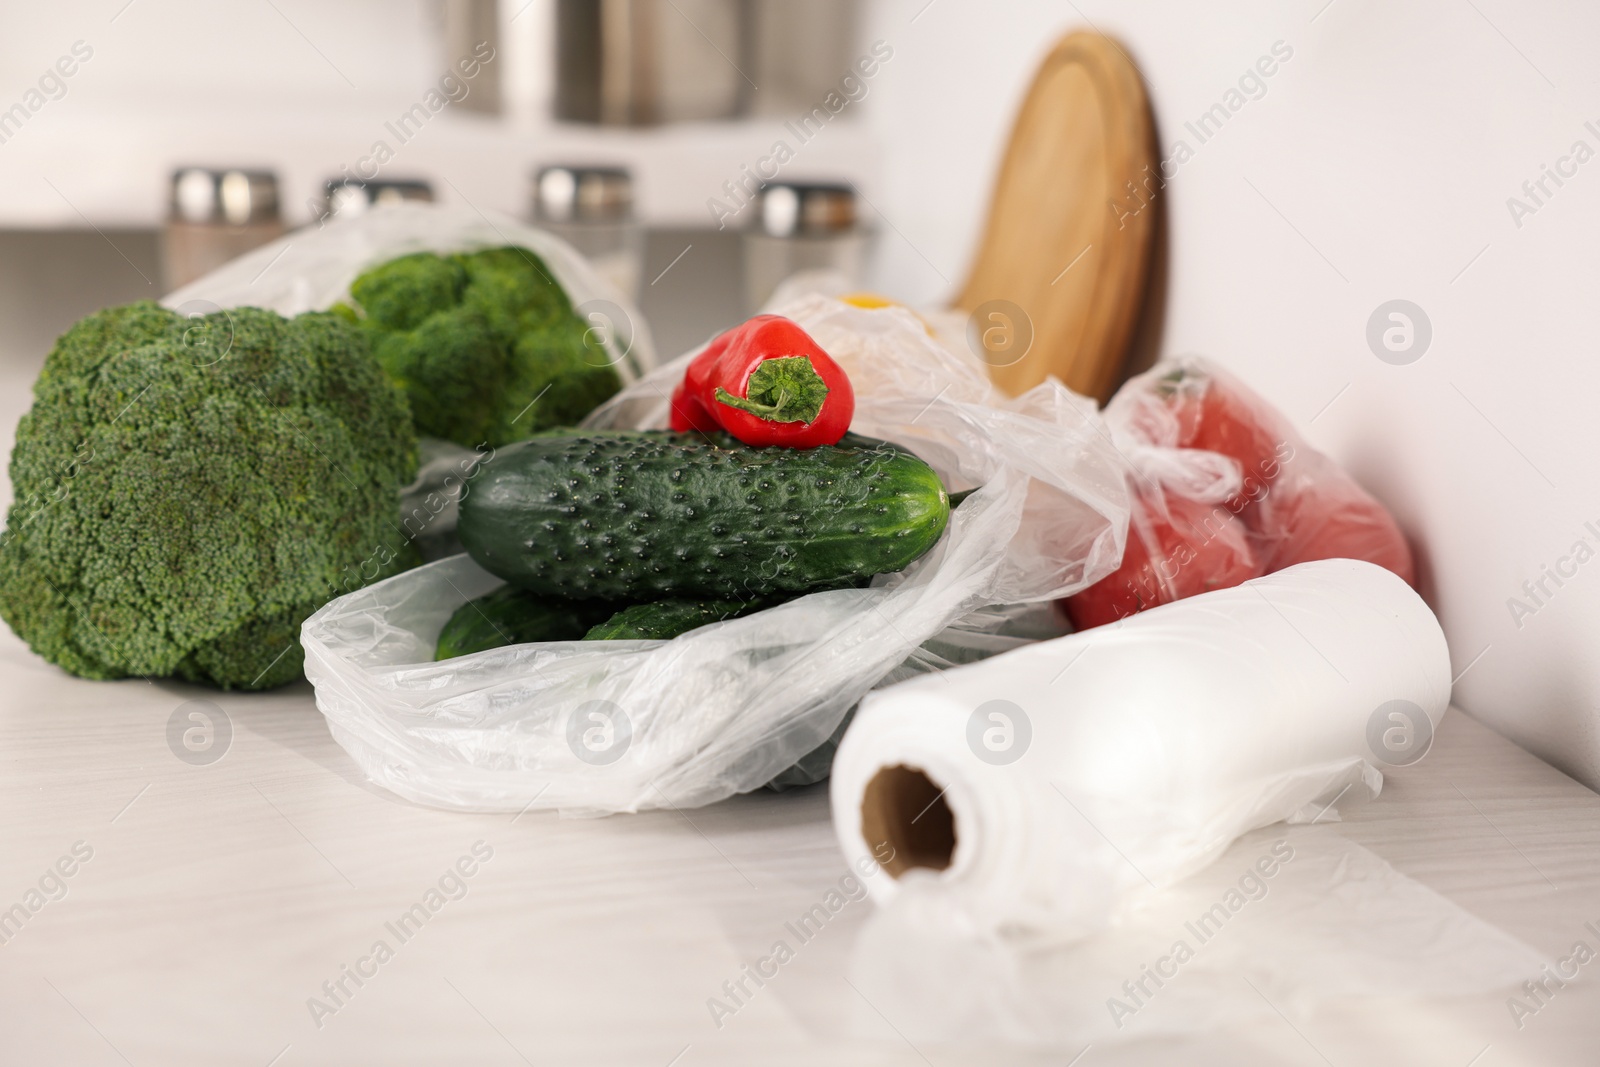 Photo of Roll of plastic bags and fresh vegetables on white table